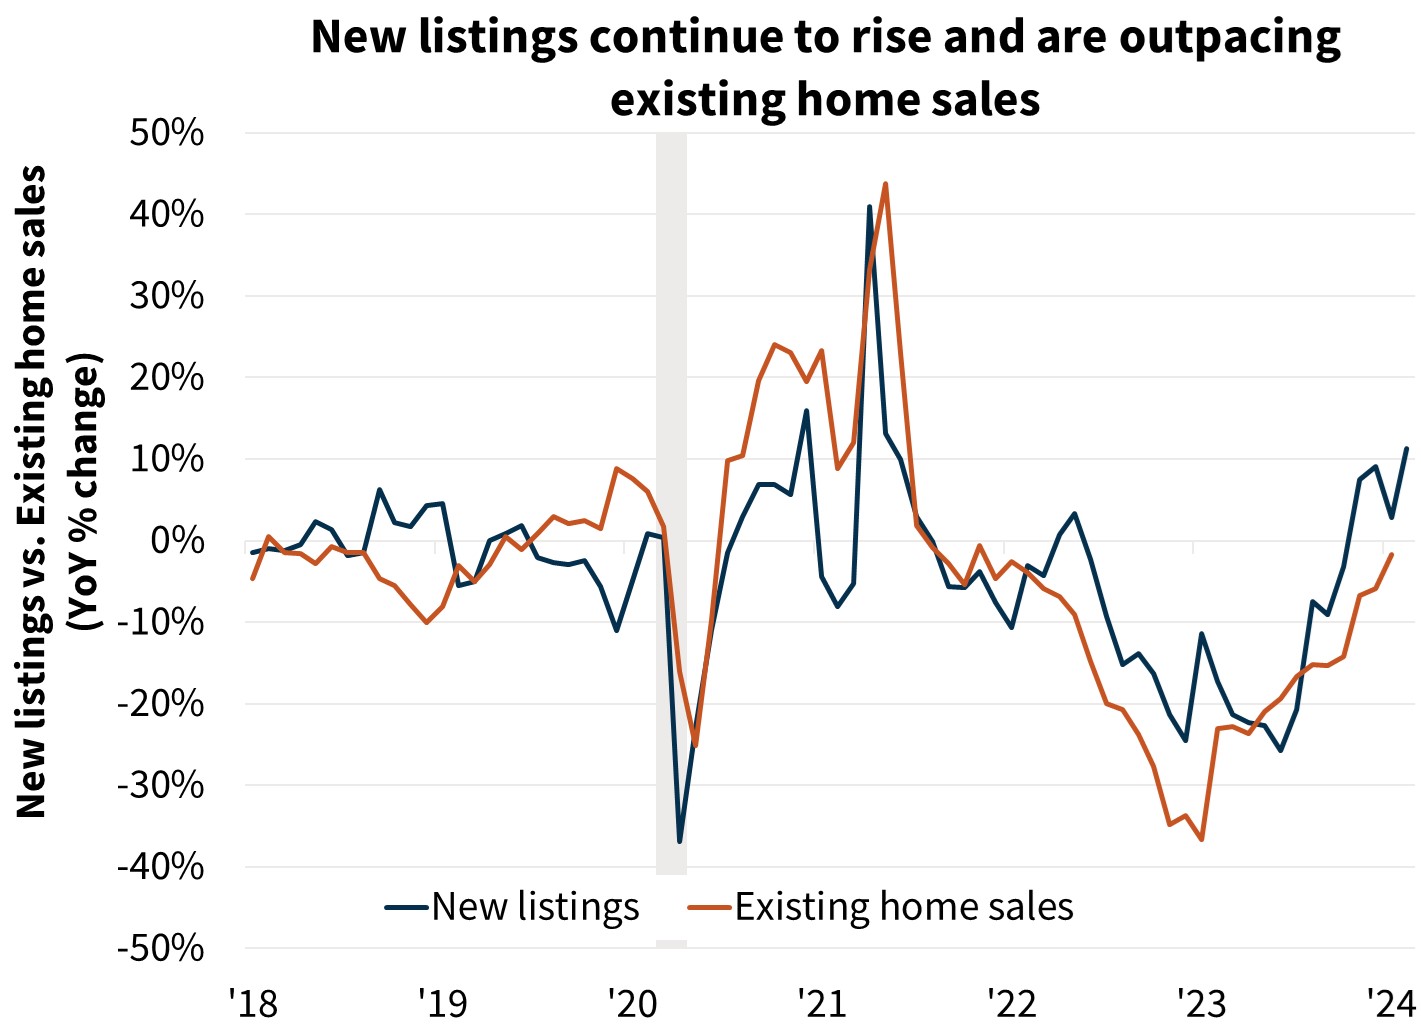 New listings continue to rise and are outpacing existing home sales